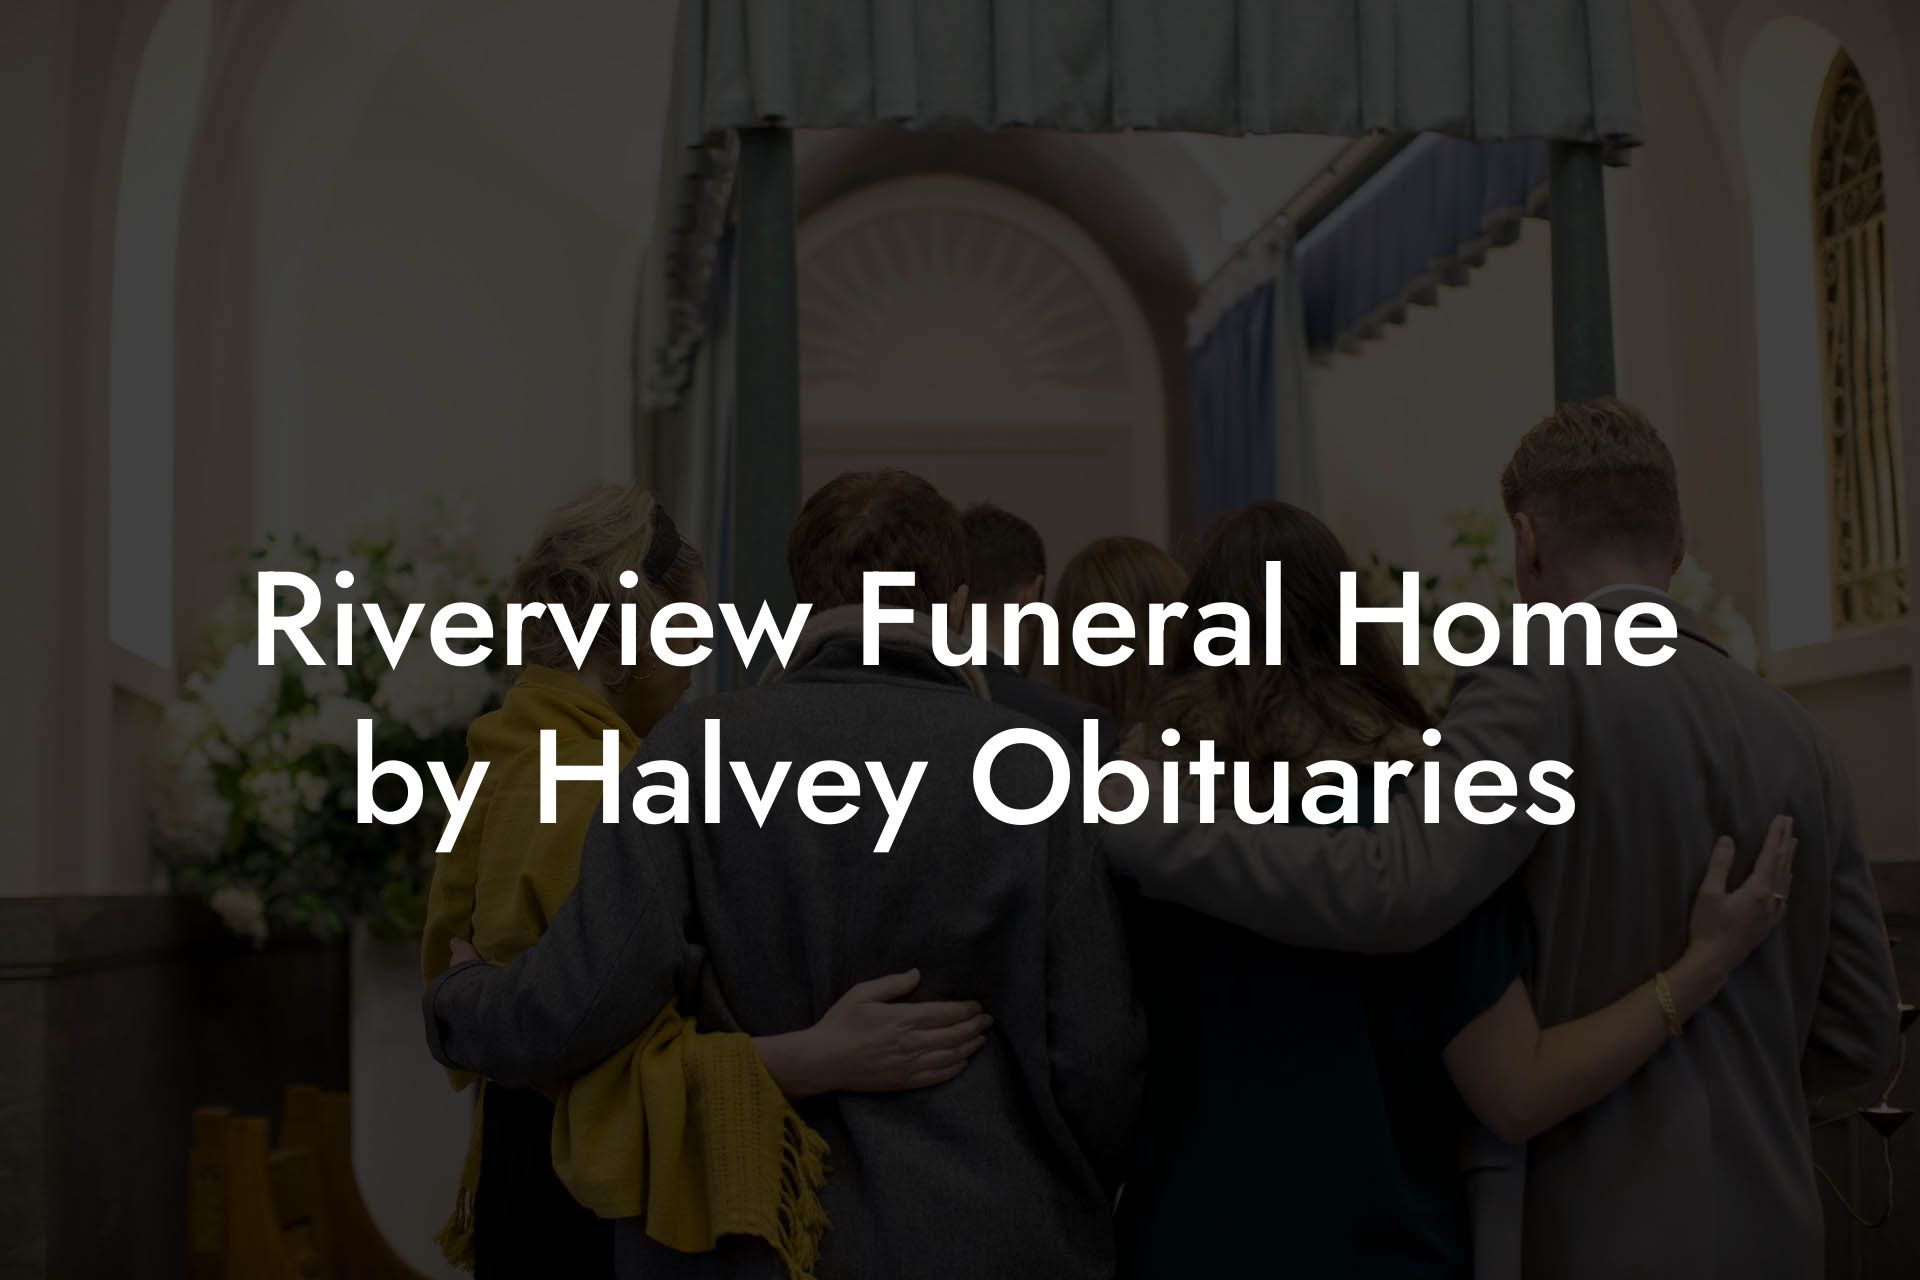 Riverview Funeral Home by Halvey Obituaries